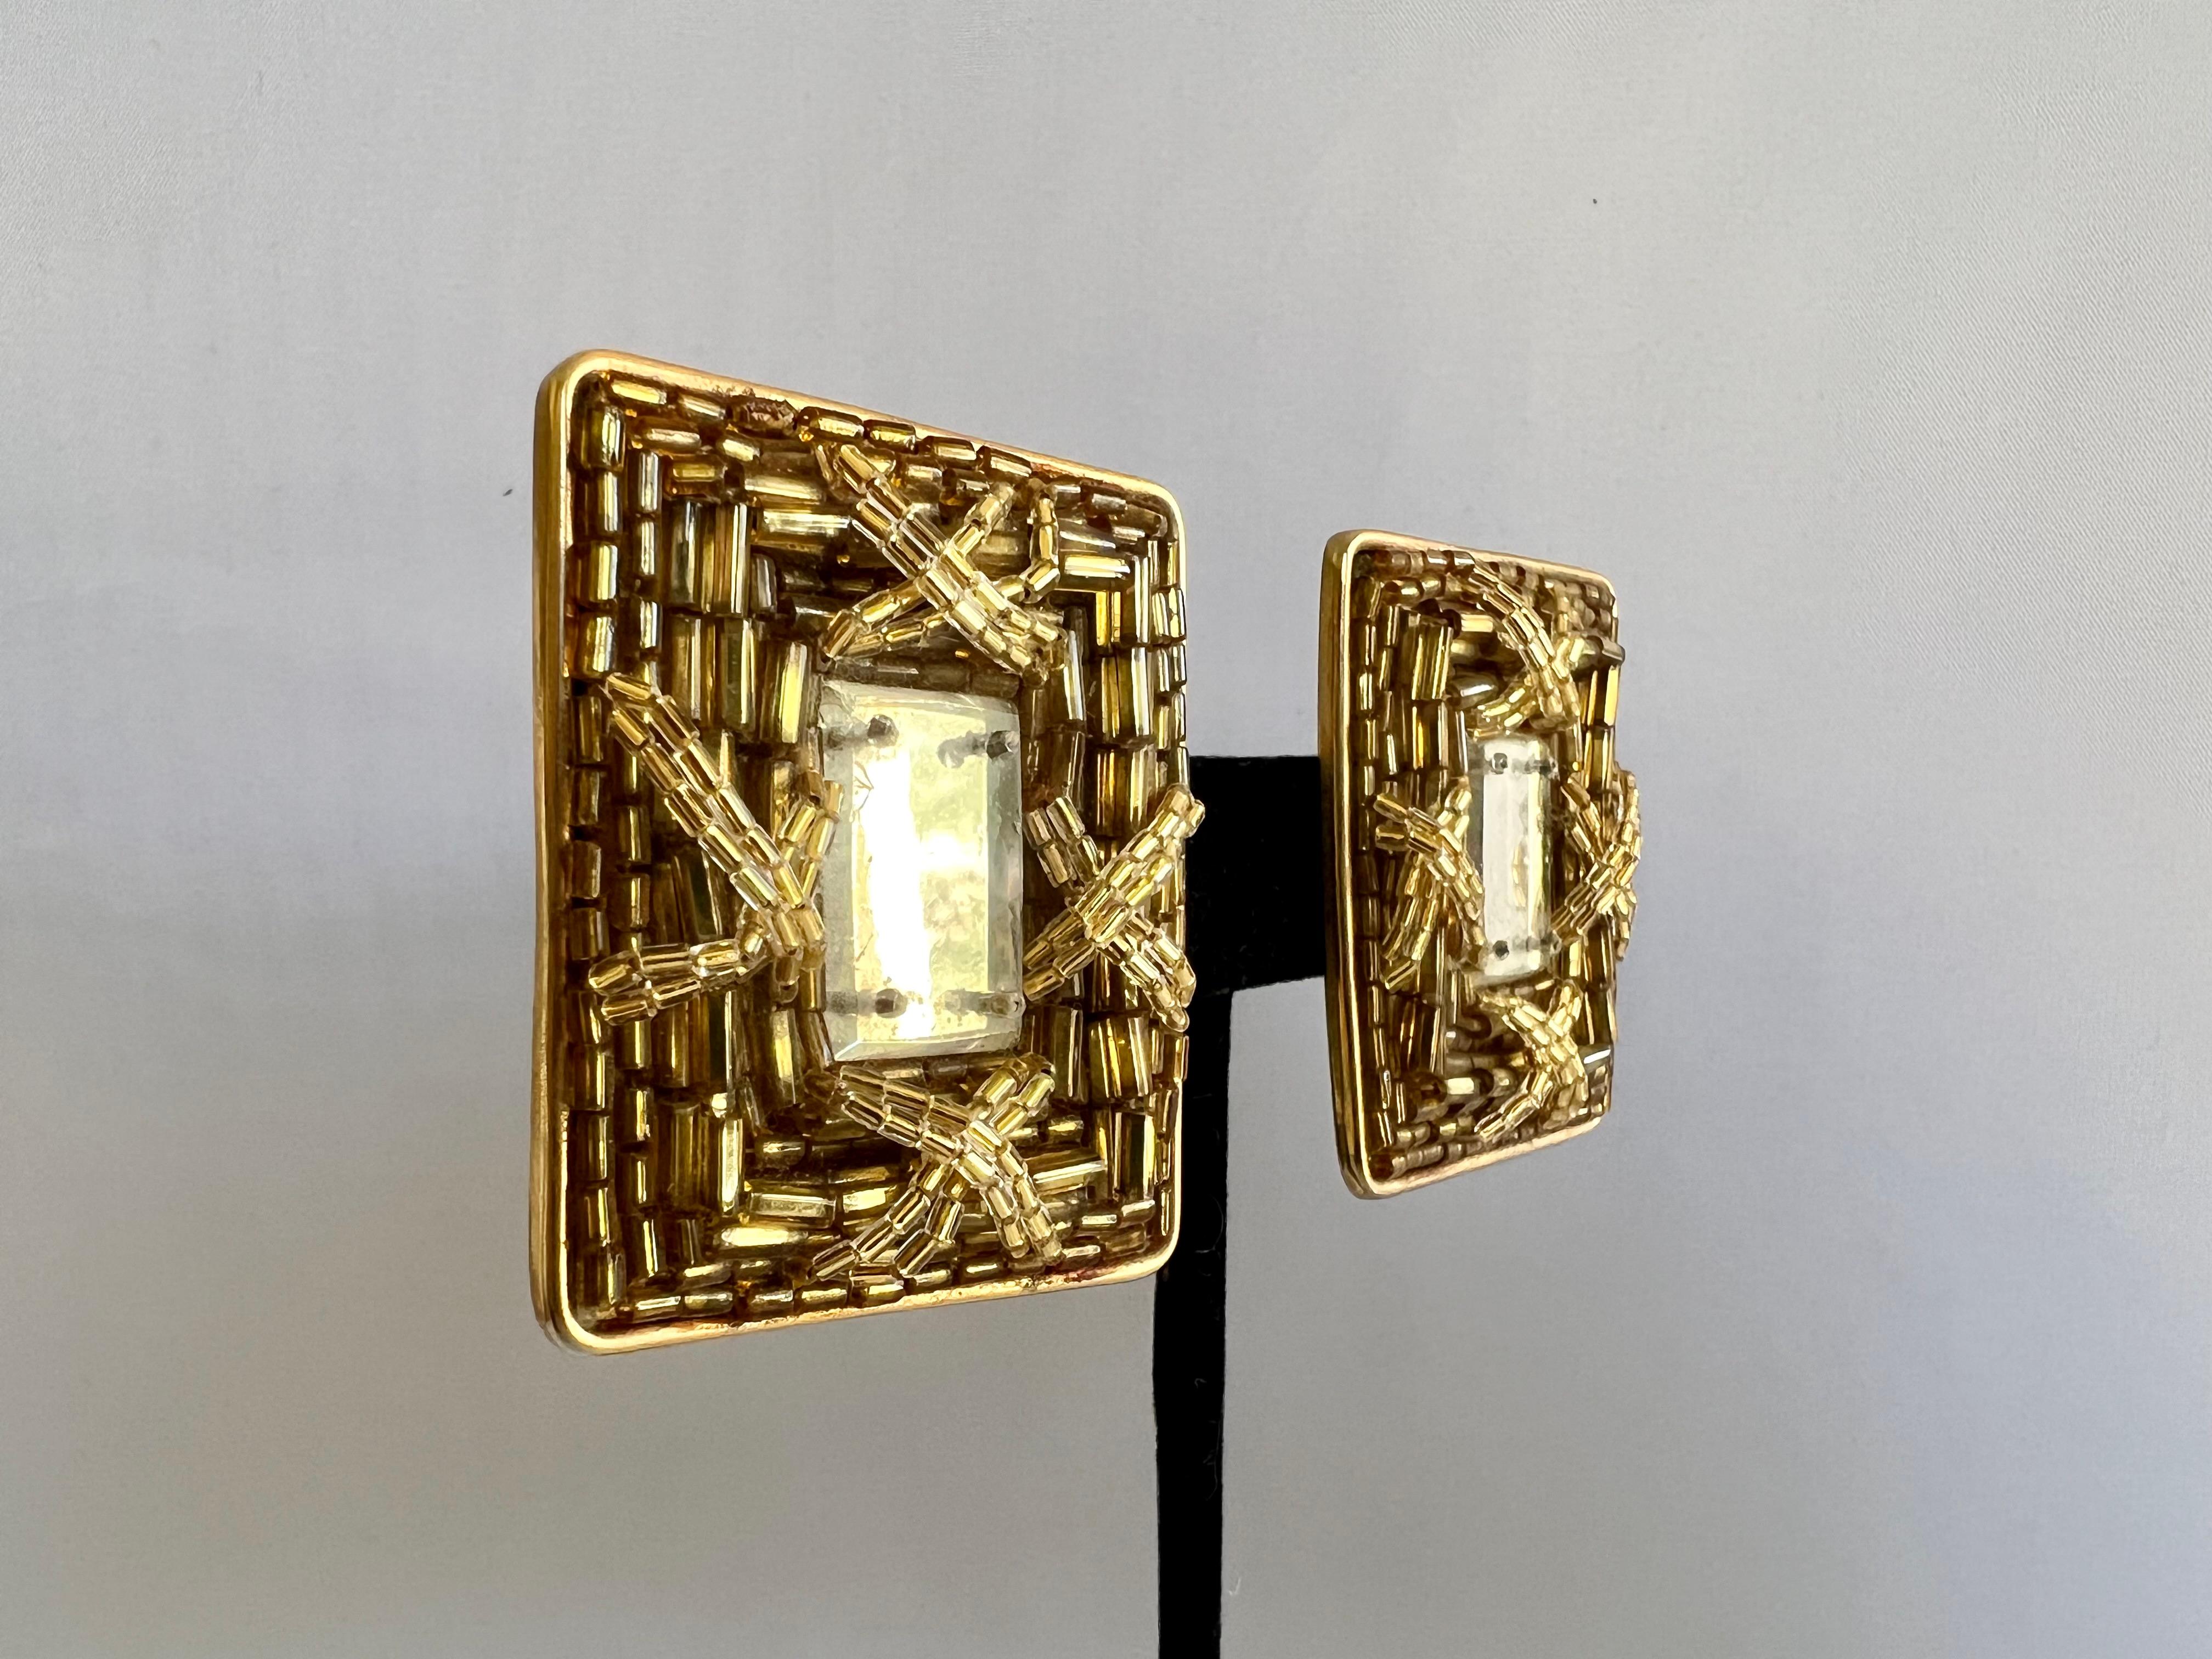 Scarce artisan vintage Lesage Paris clip-on earrings with inset mirrors, handcrafted and beaded in France.